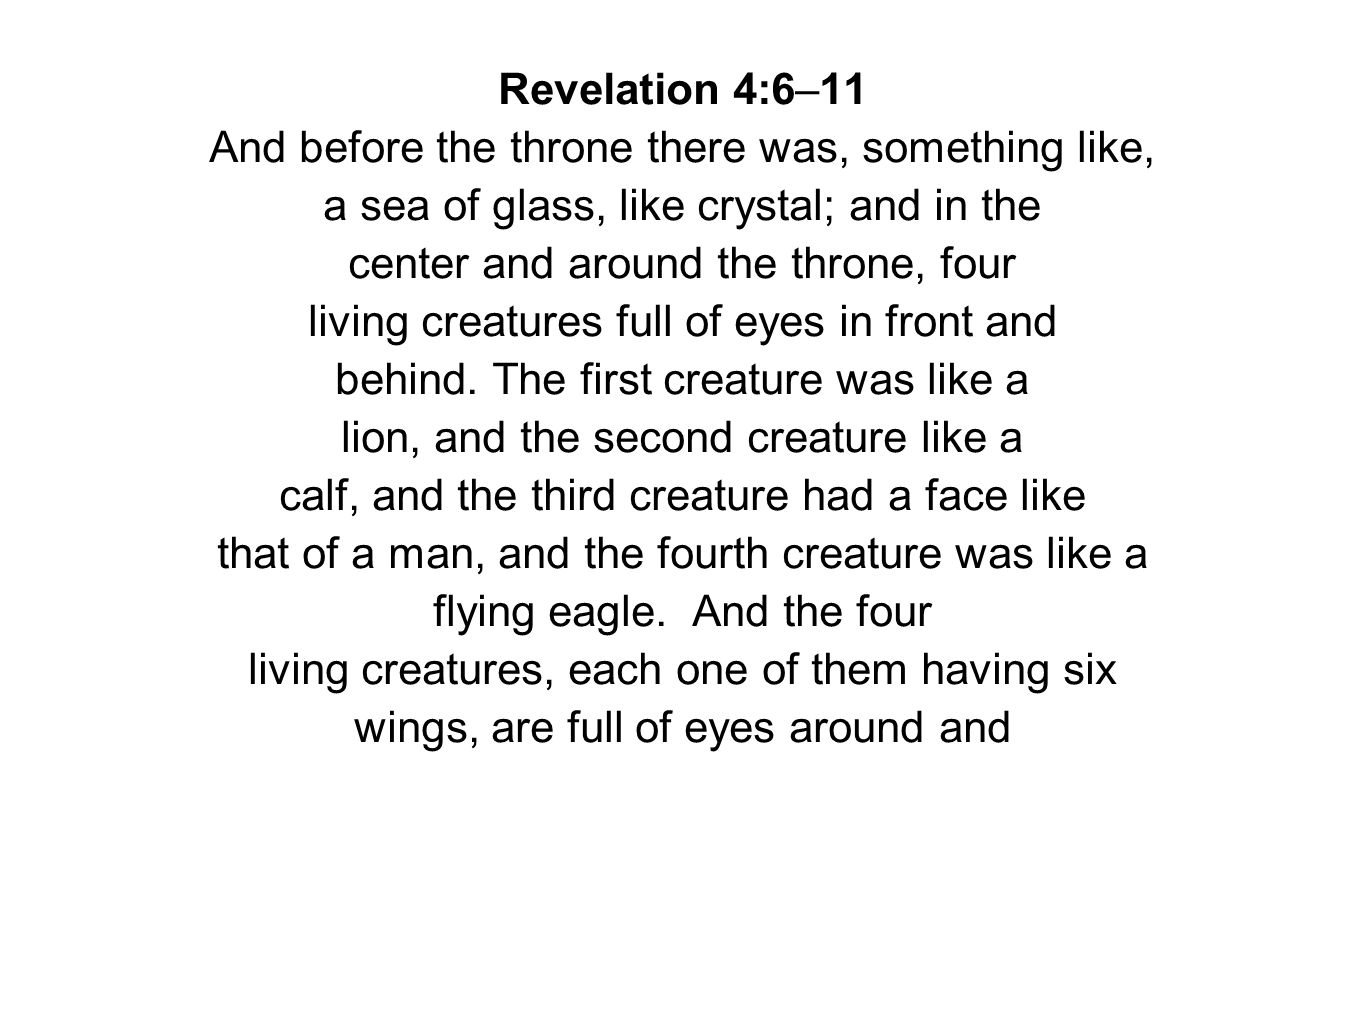 Revelation 4:6–11 And before the throne there was, something like, a sea of glass, like crystal; and in the center and around the throne, four living creatures full of eyes in front and behind.